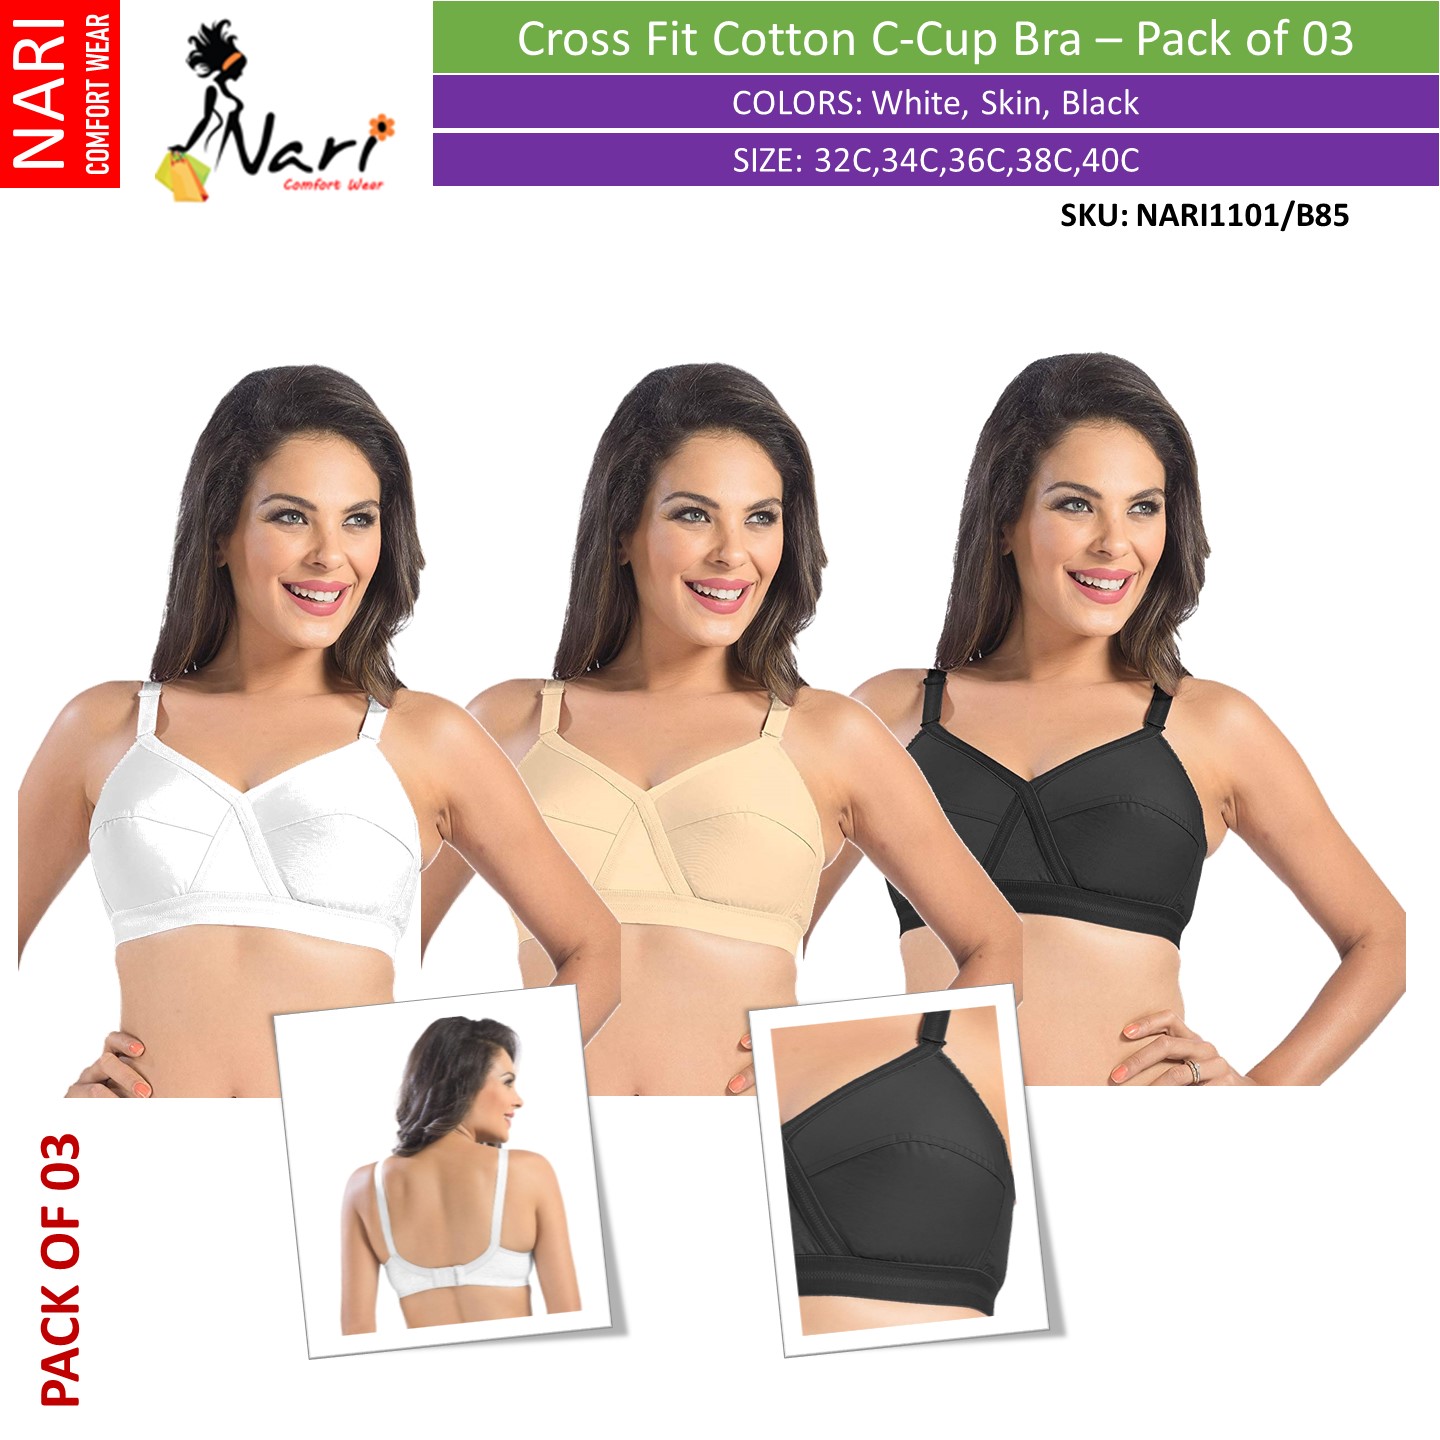 Cross Fit B,C-Cup Cotton Bra – Pack of 03 – Online Shopping Point